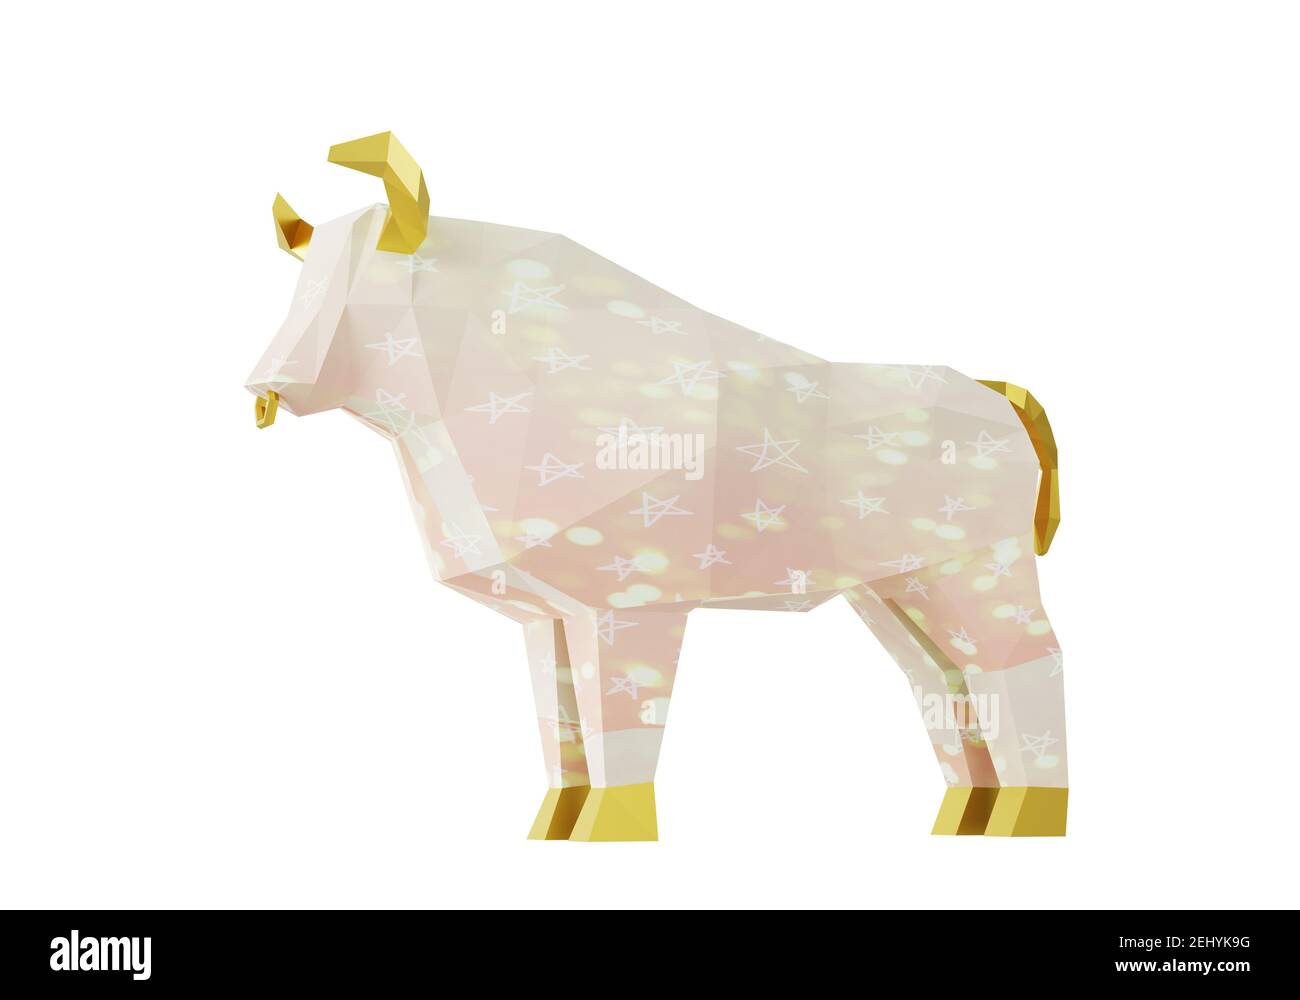 Low Poly Light Pink Bull with stars, folded paper animal figurine, 3d render Stock Photo